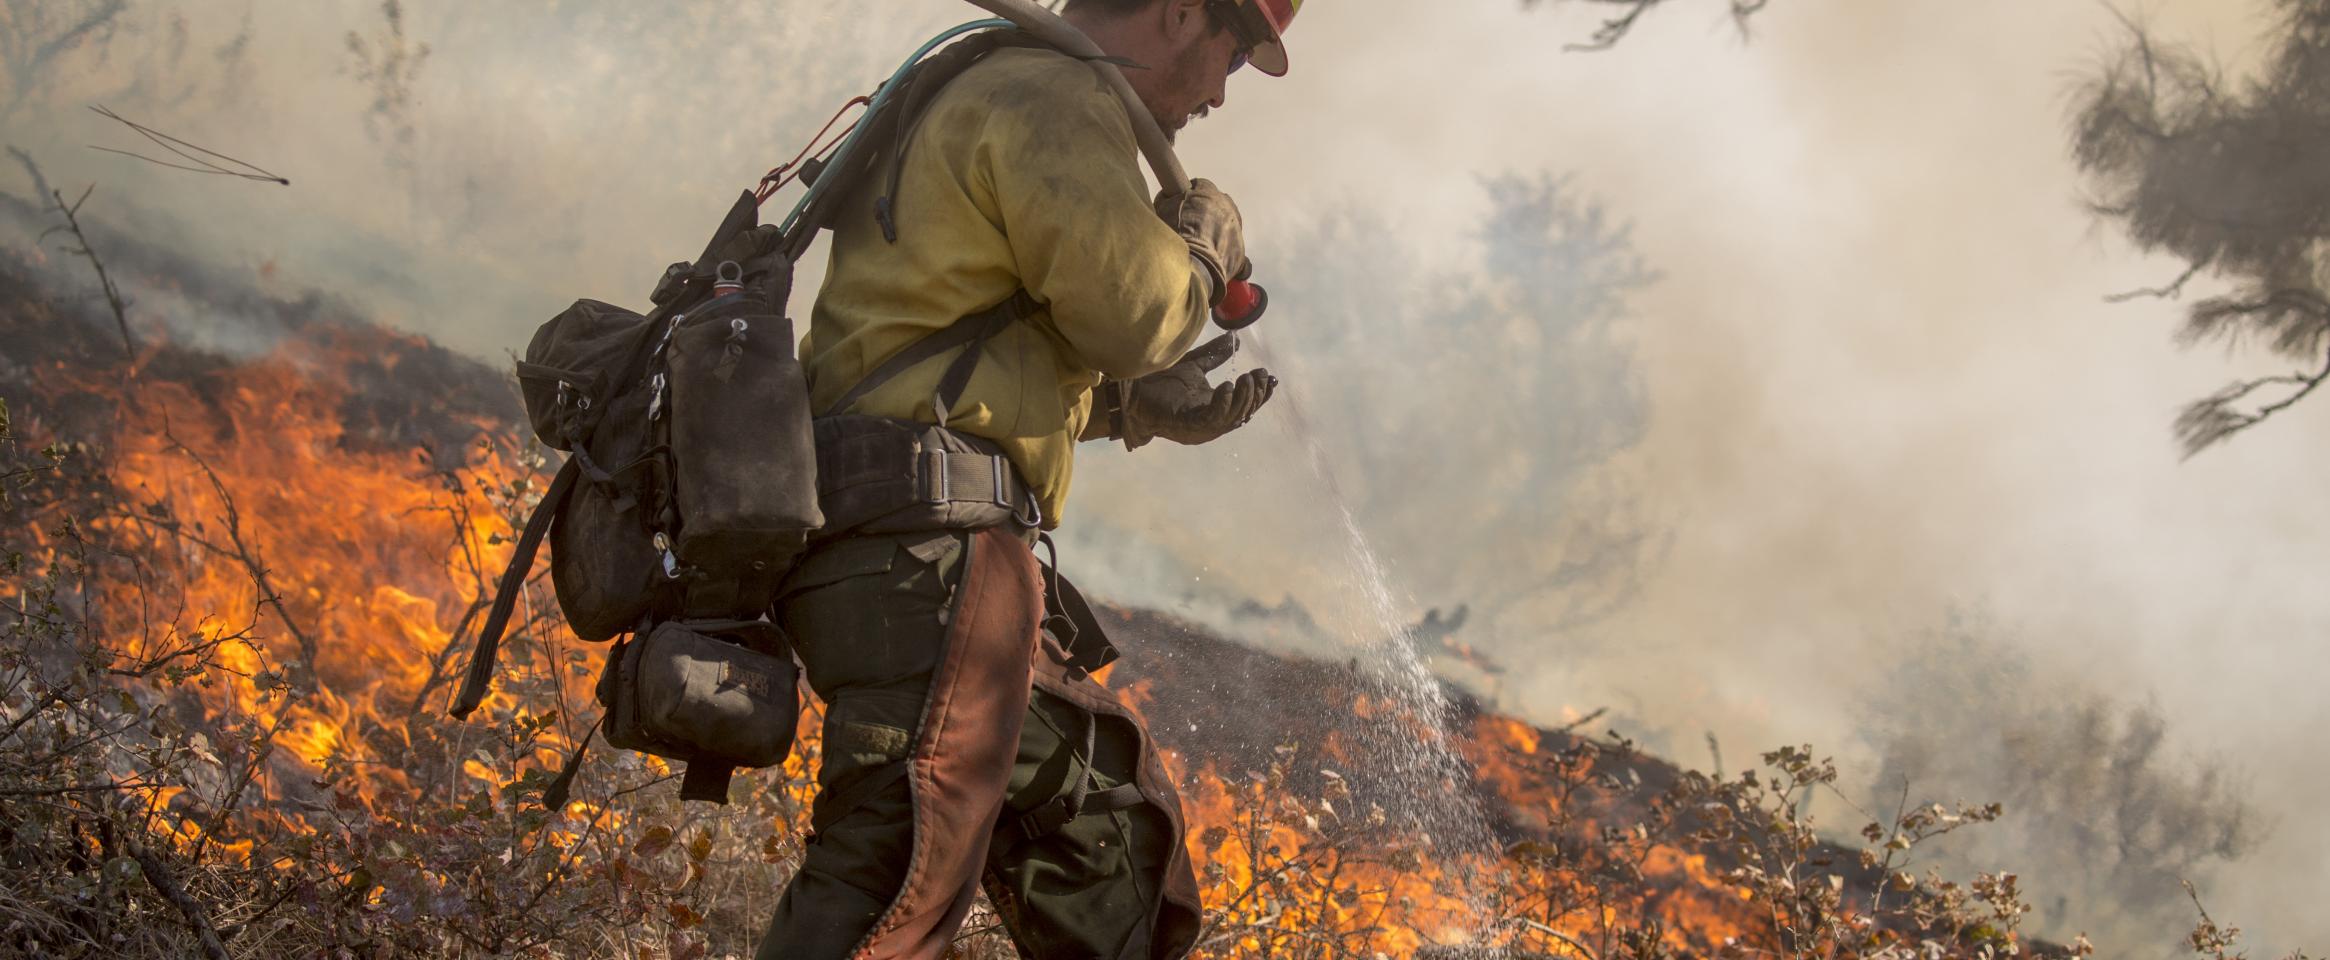 An Idaho firefighter douses flames in the Boise National Forest